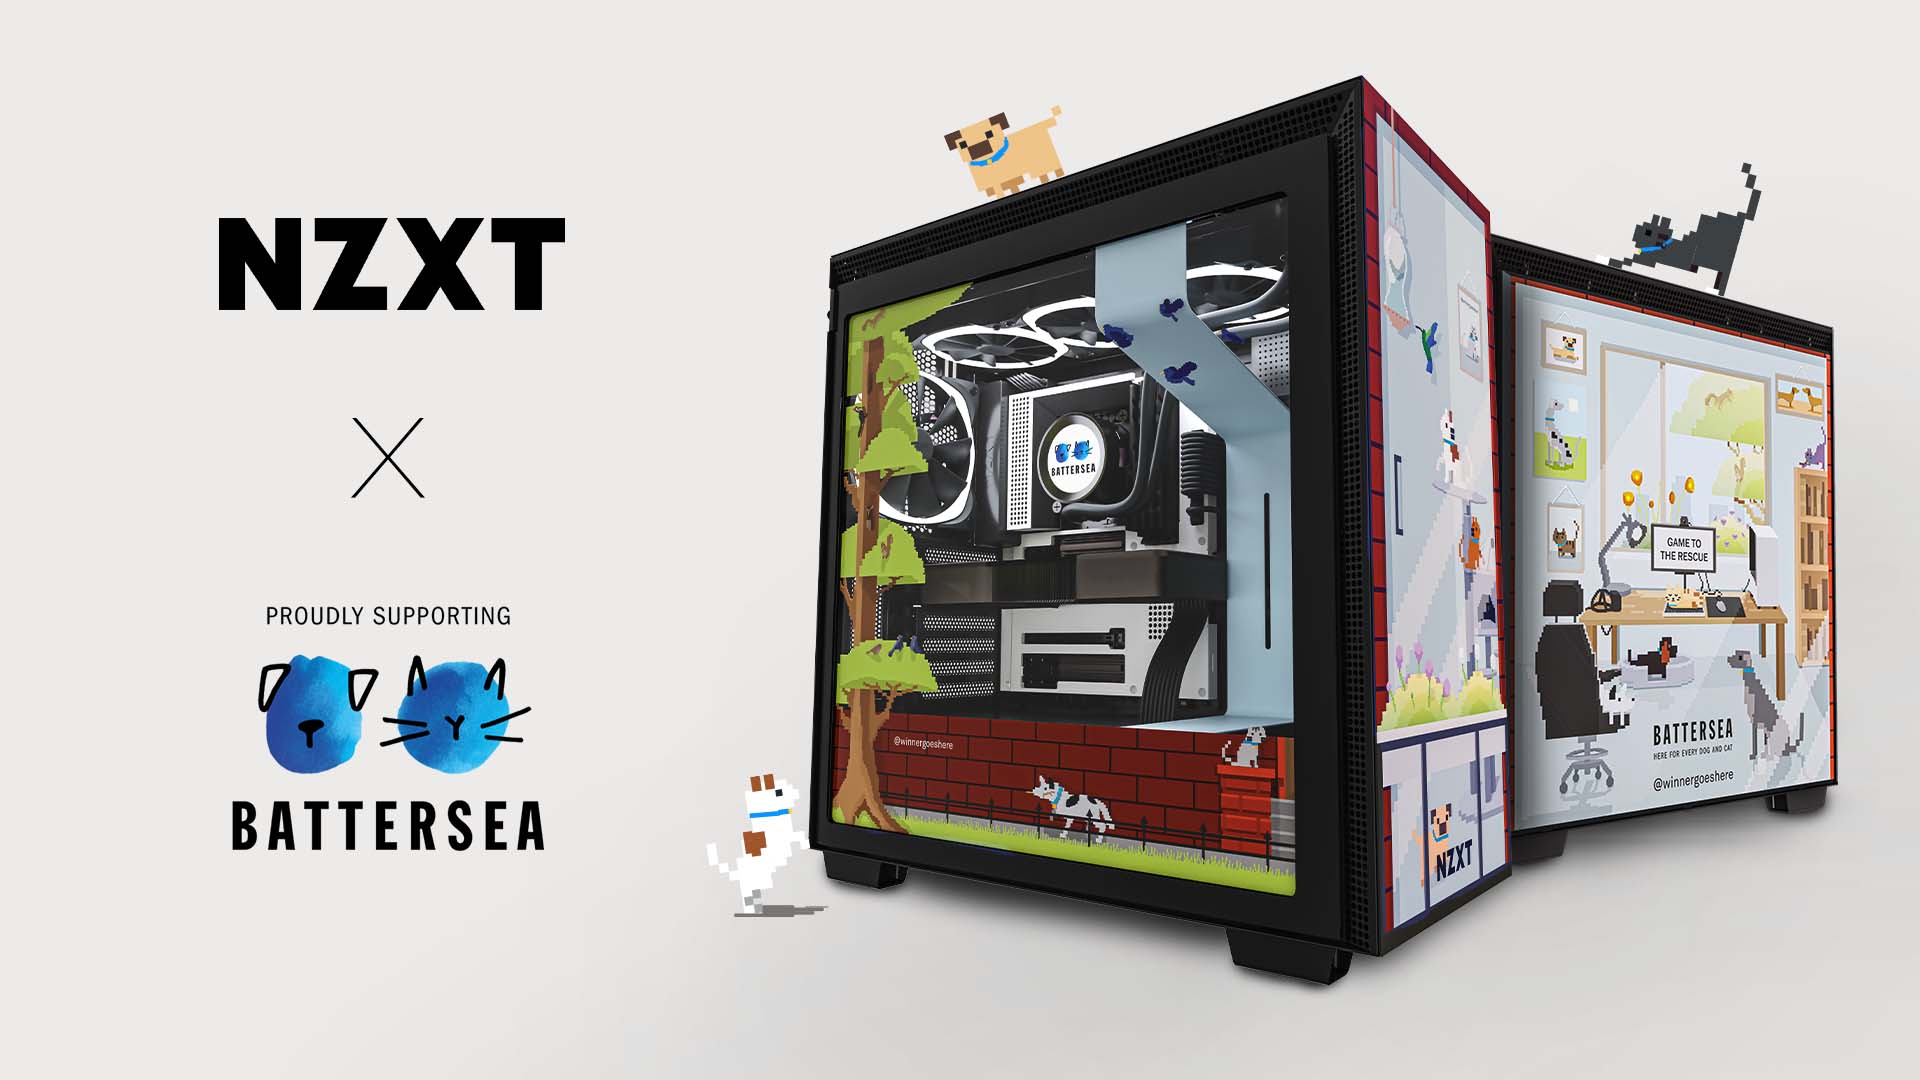 The custom NZXT x Battersea PC you could win